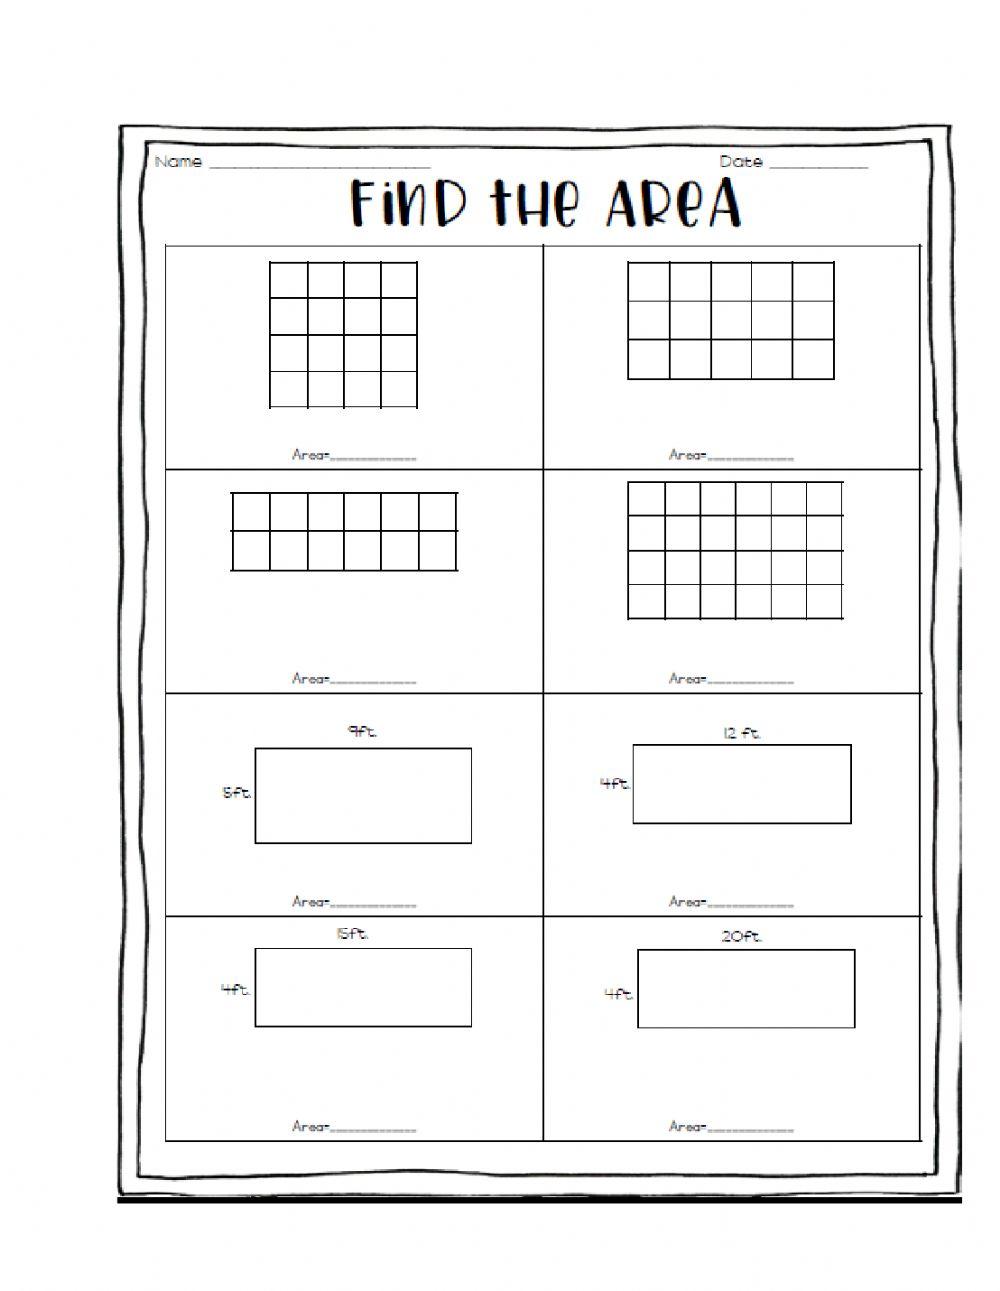 Find the Area